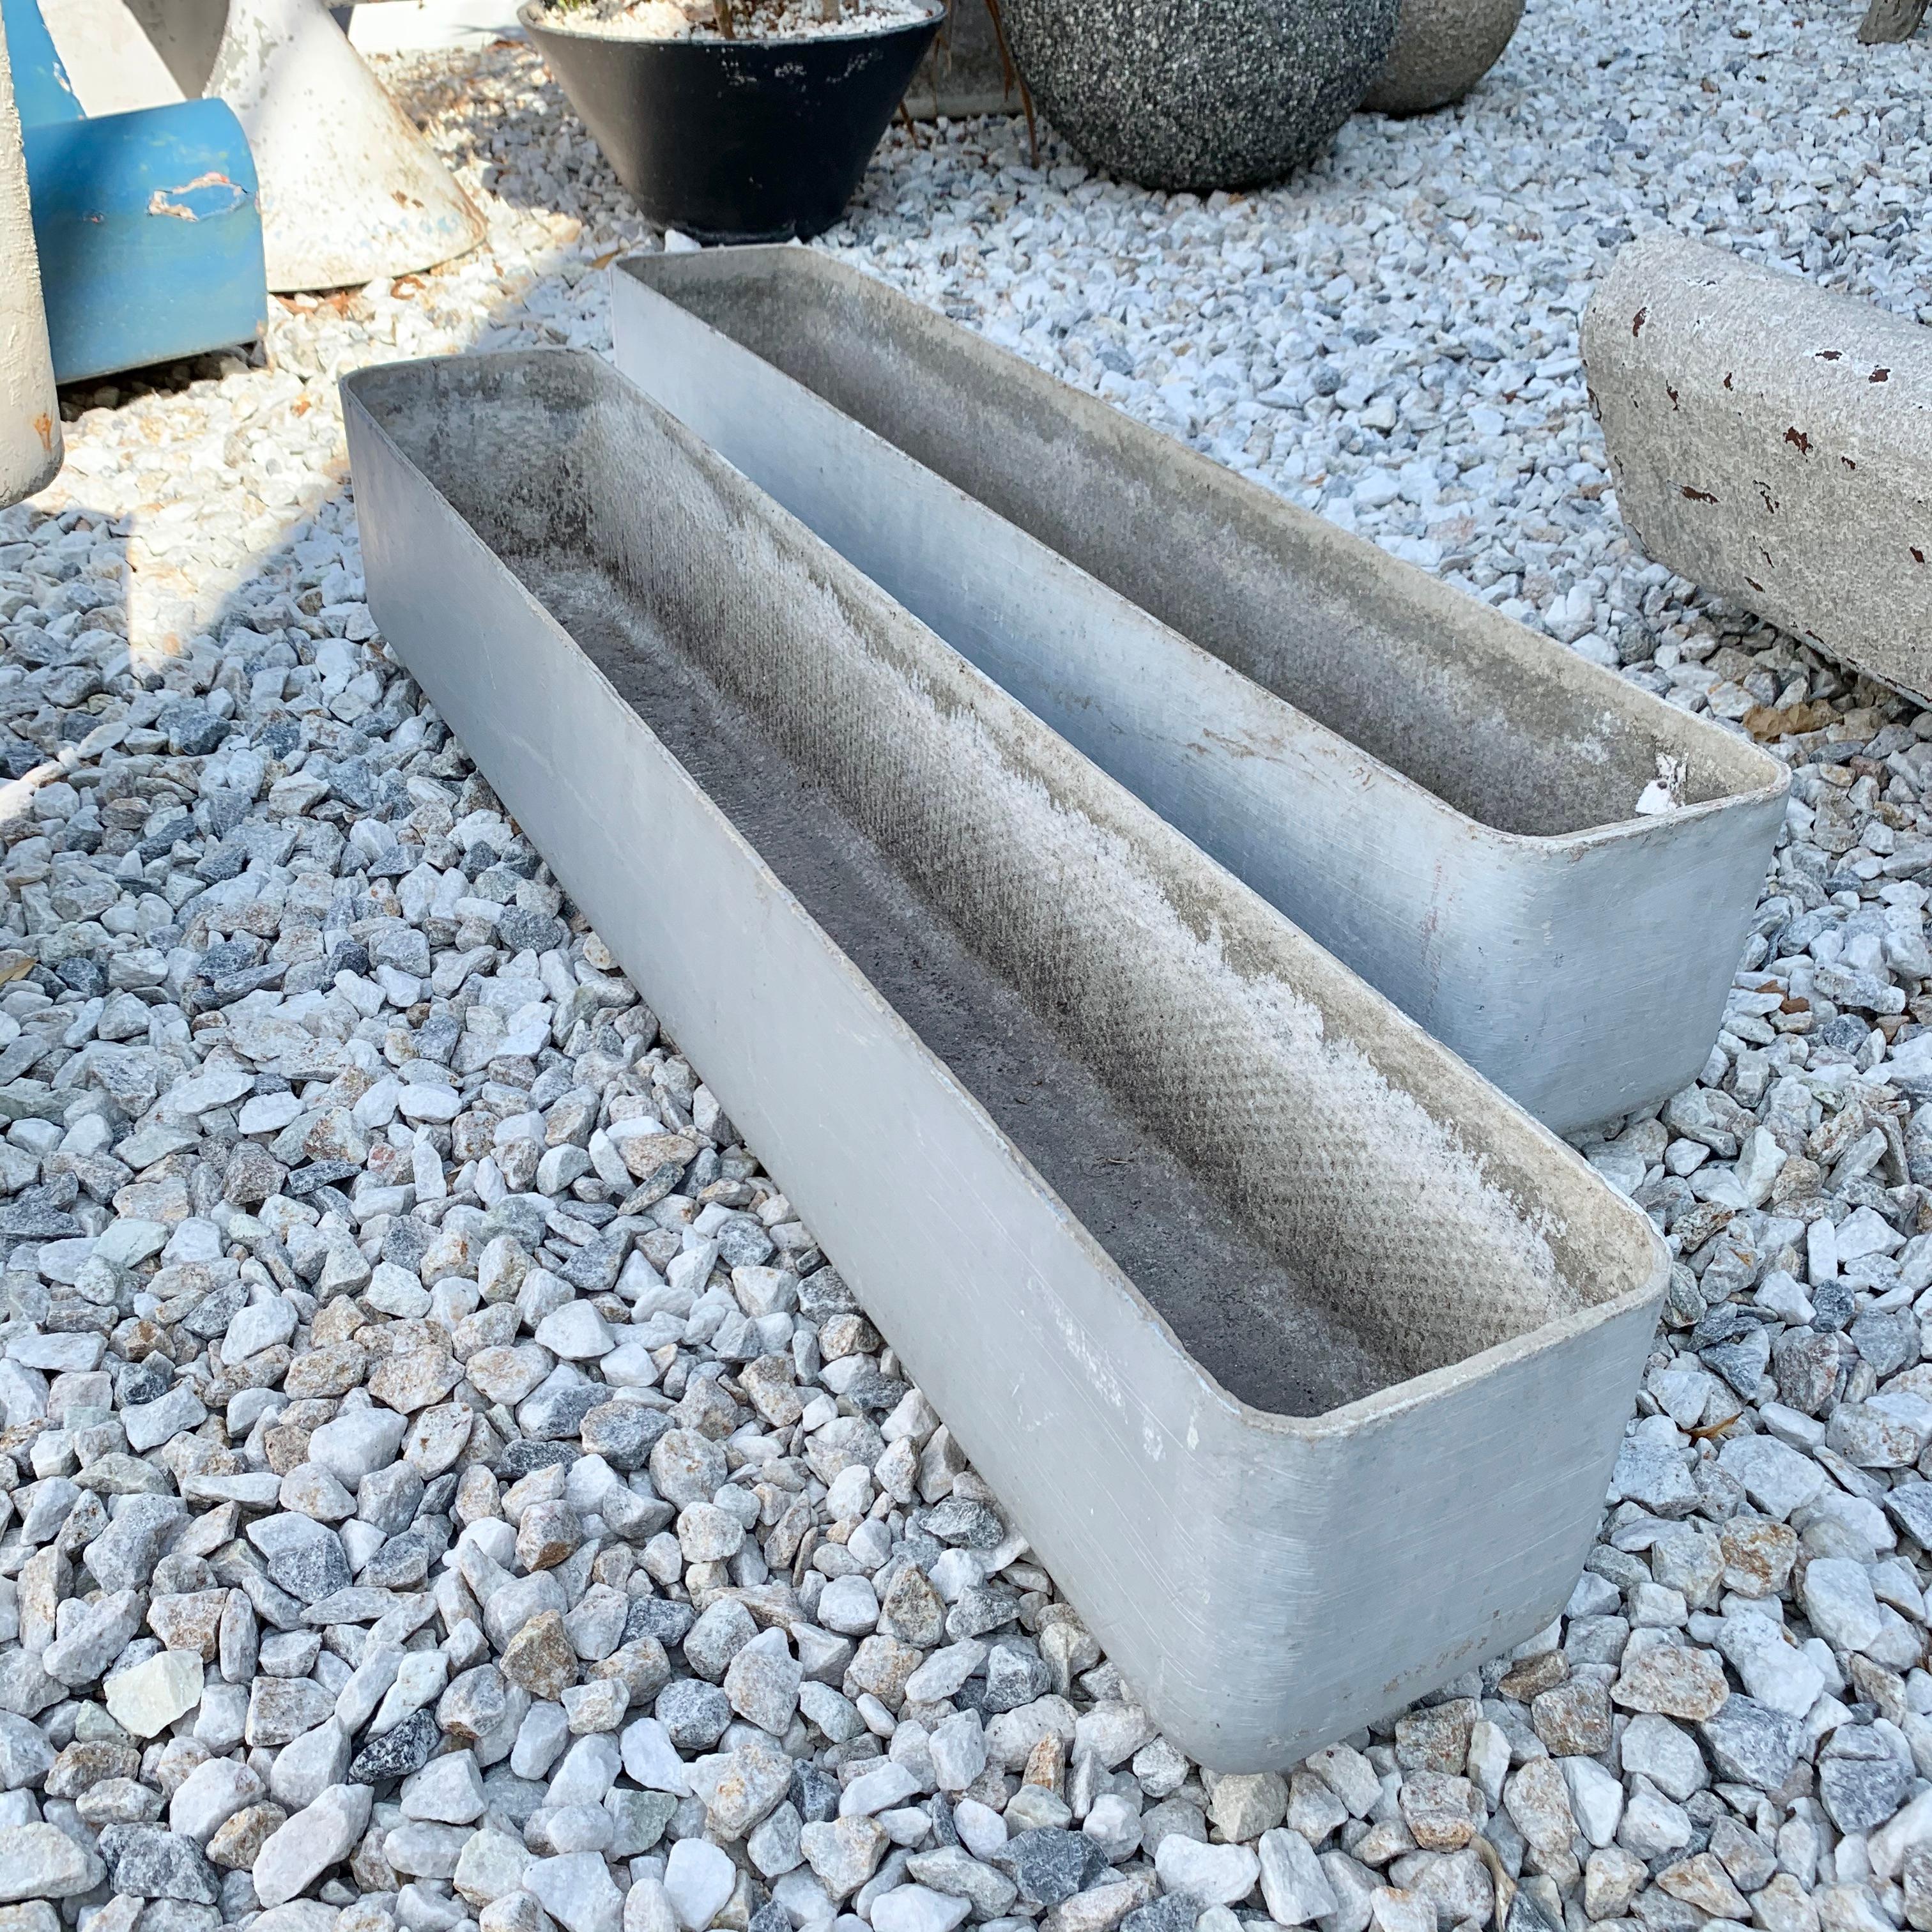 Matching pair of rectangular planter by Swiss architect Willy Guhl for Eternit. Rounded edges throughout. Just under 3.5 feet long. Great lines and clean design. Good vintage condition and patina. Perfect for narrow spaces indoors or outside. 

2